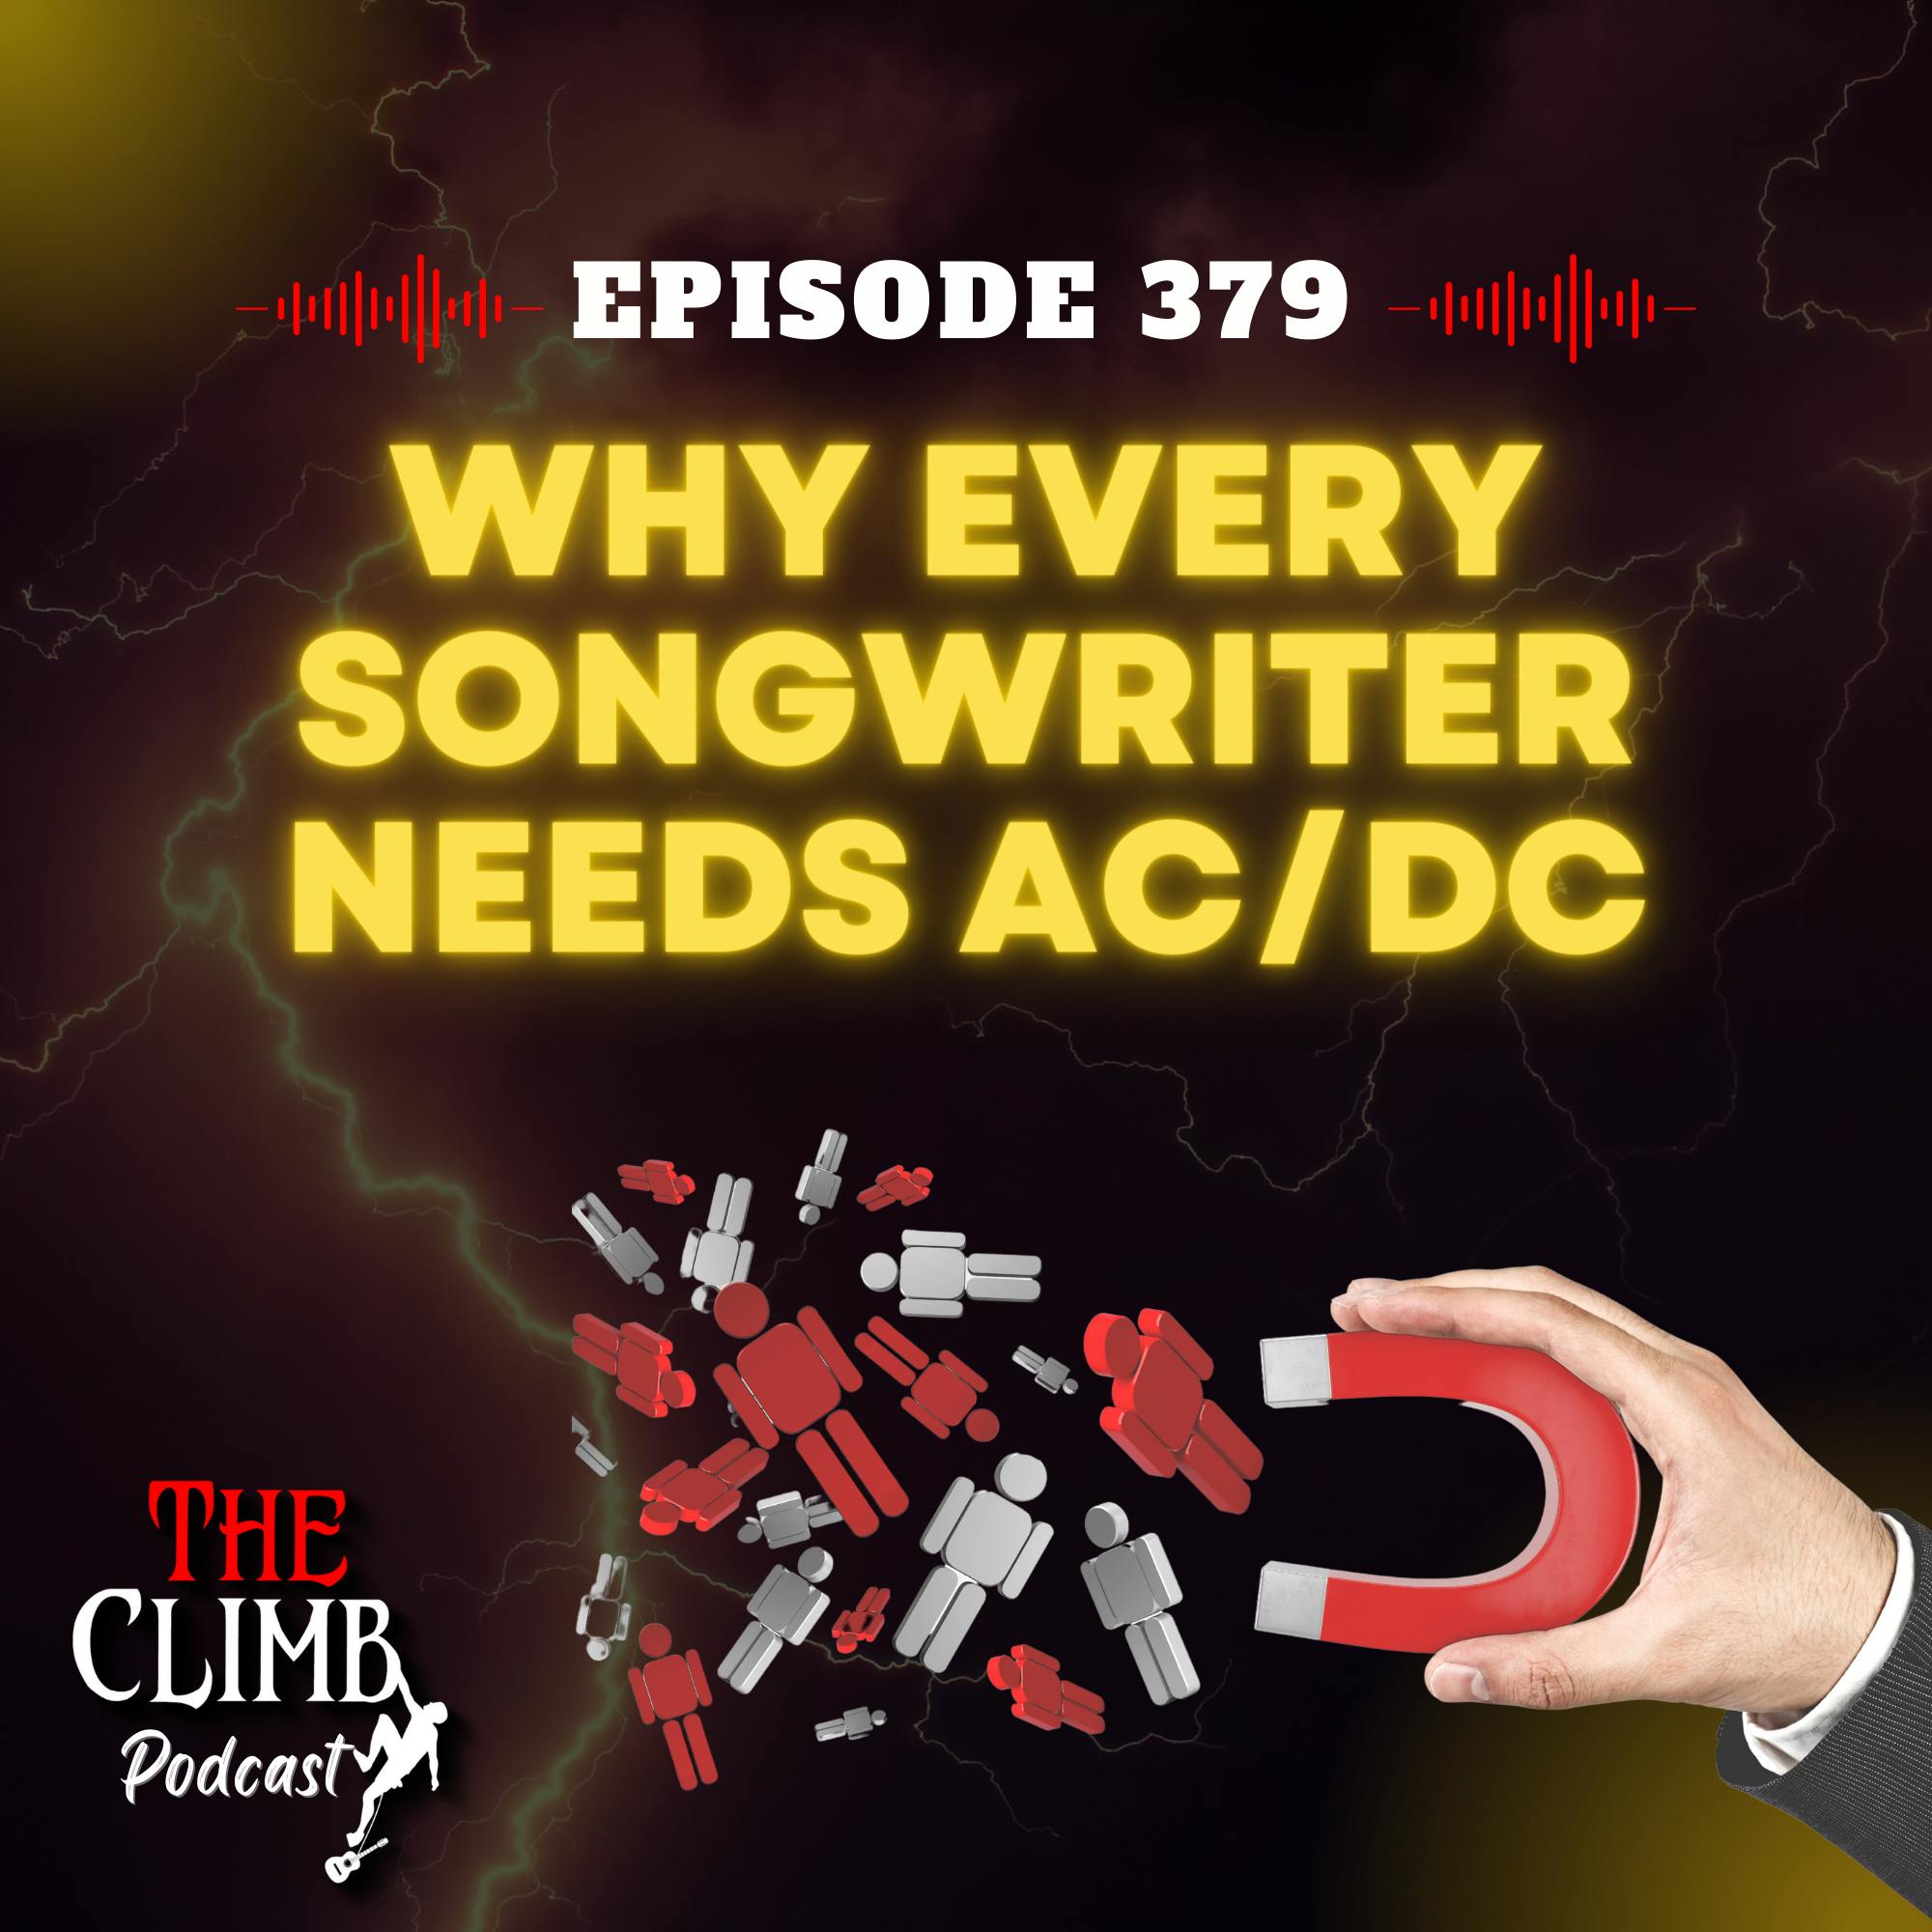 Ep 379: Why Every Songwriter Needs AC/DC